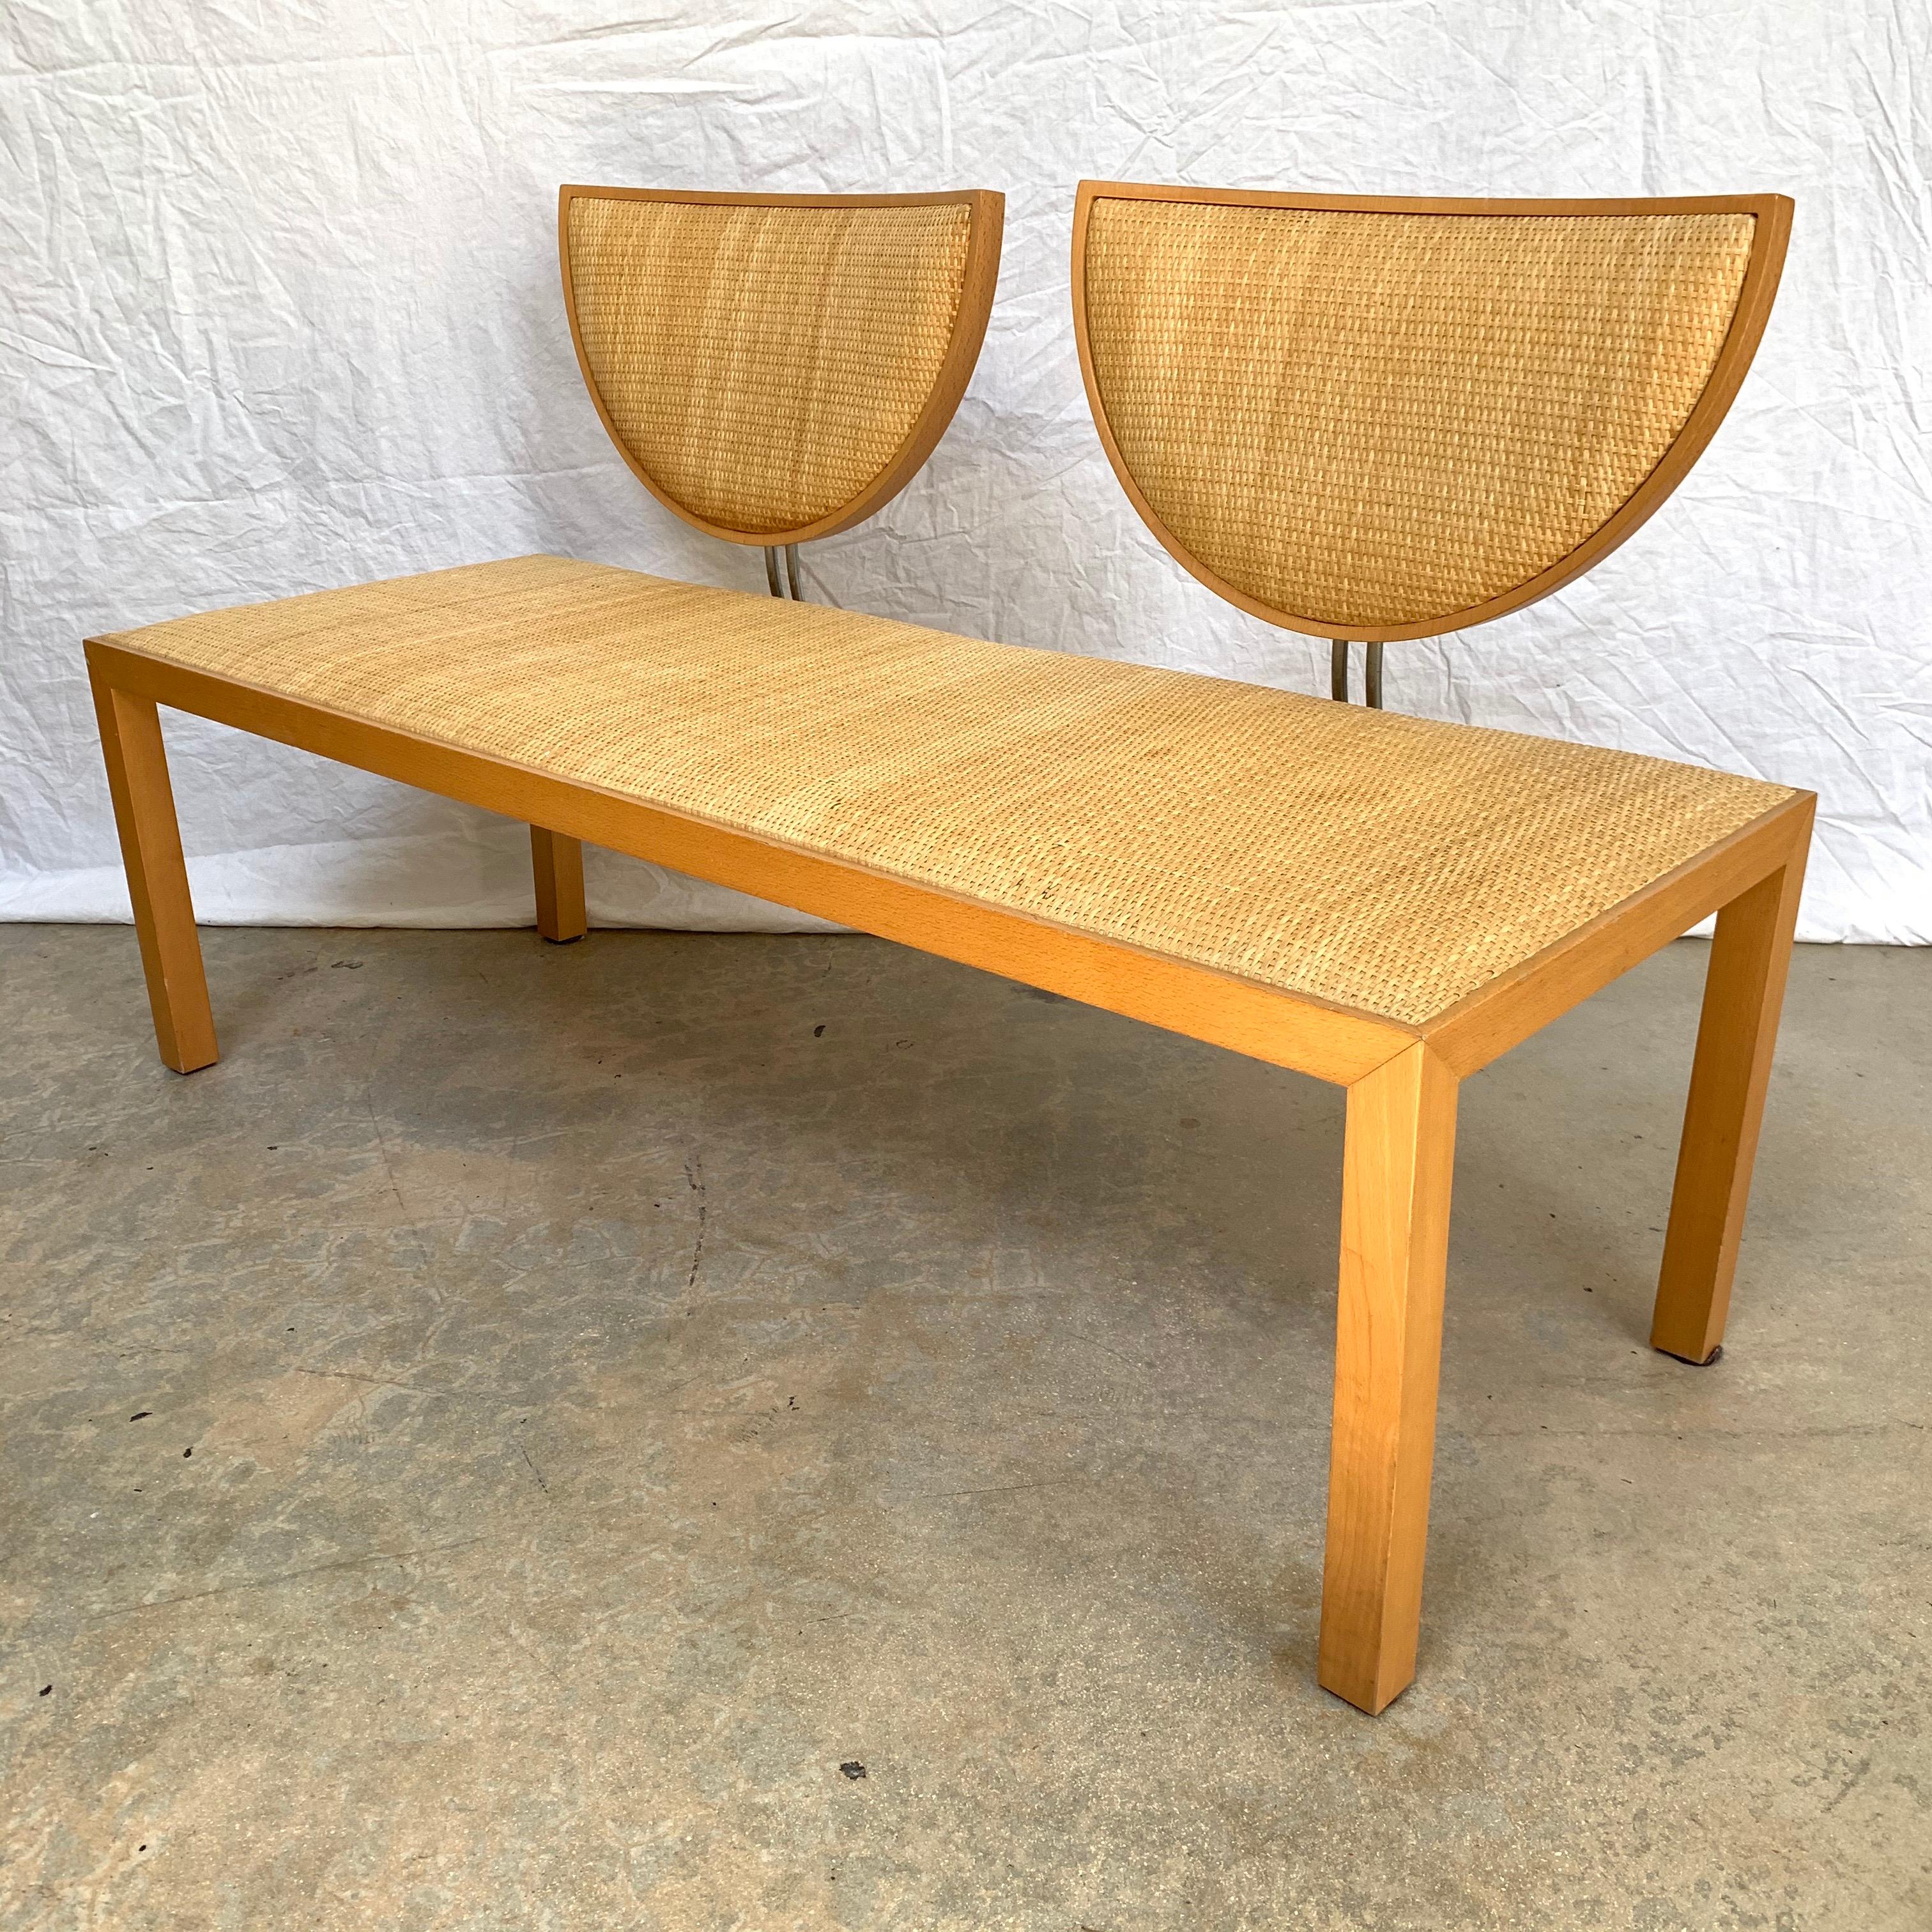 Postmodern bench or settee rendered in a square parsons oak frame with raffia seat and back upholstery and two bak rests supported by bent chrome plated steel, style of Memphis Group, circa 1980’s